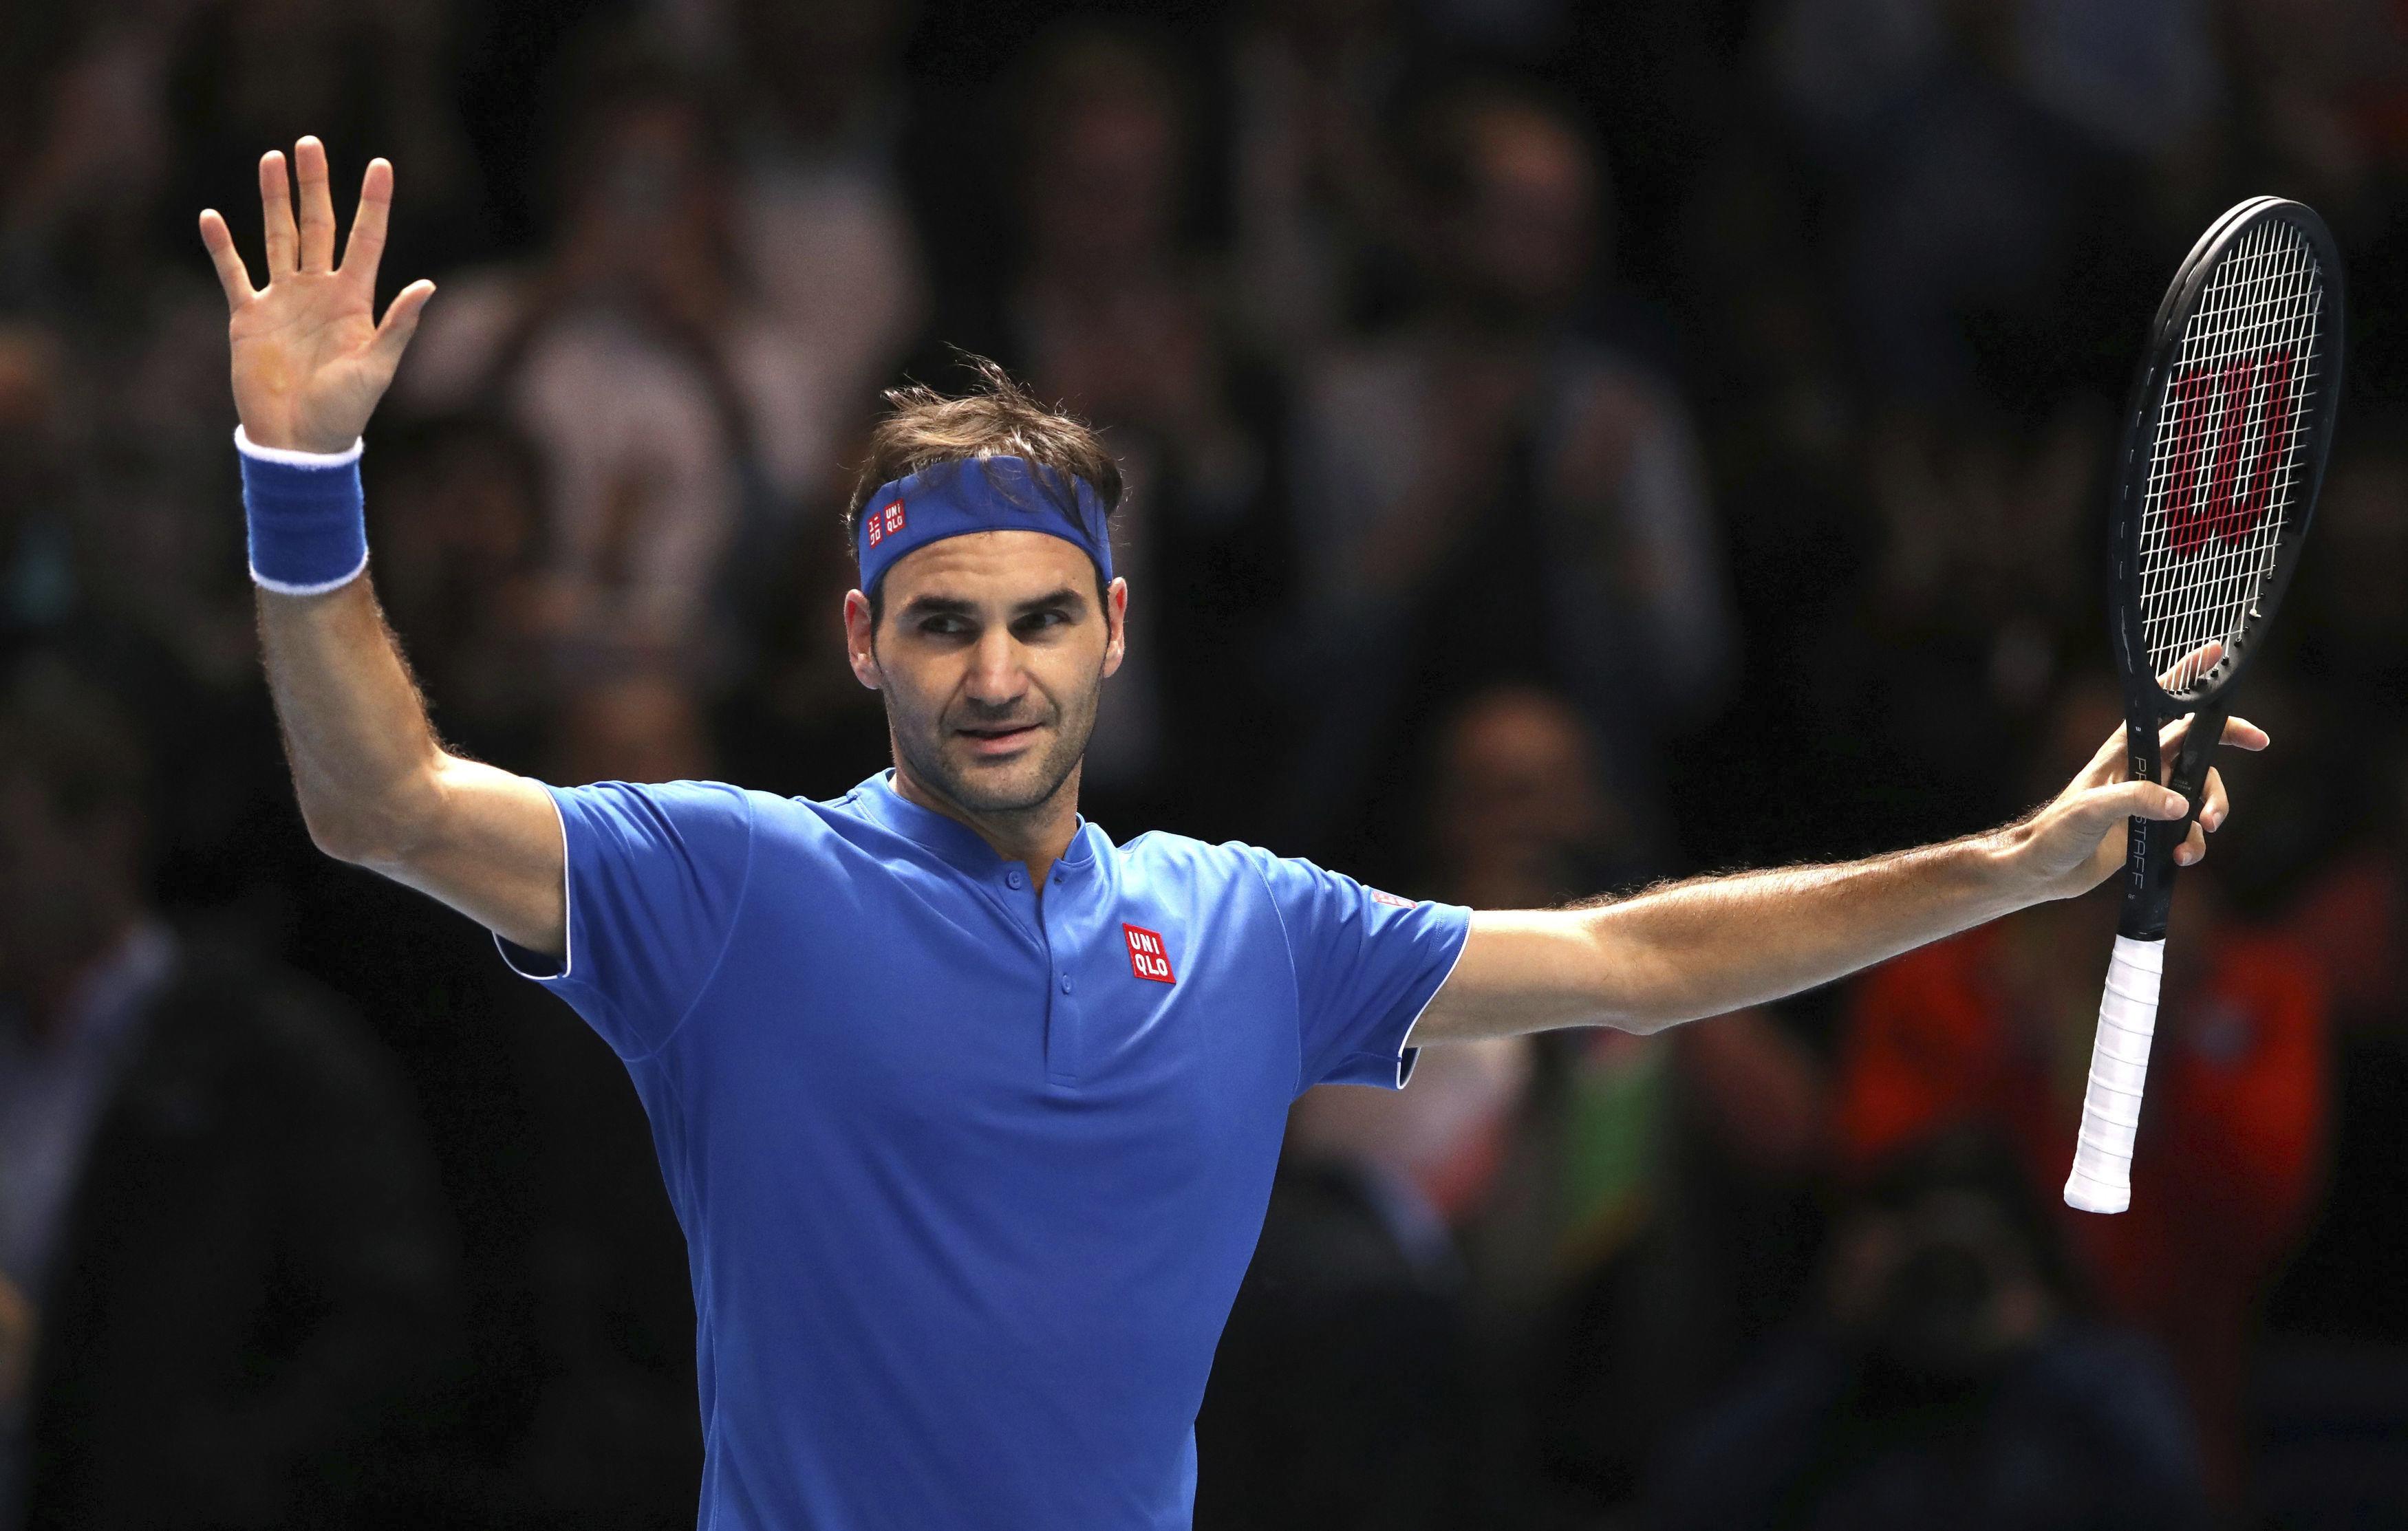 Roger Federer advances to record-extending 15th ATP Finals semi | The Spokesman-Review